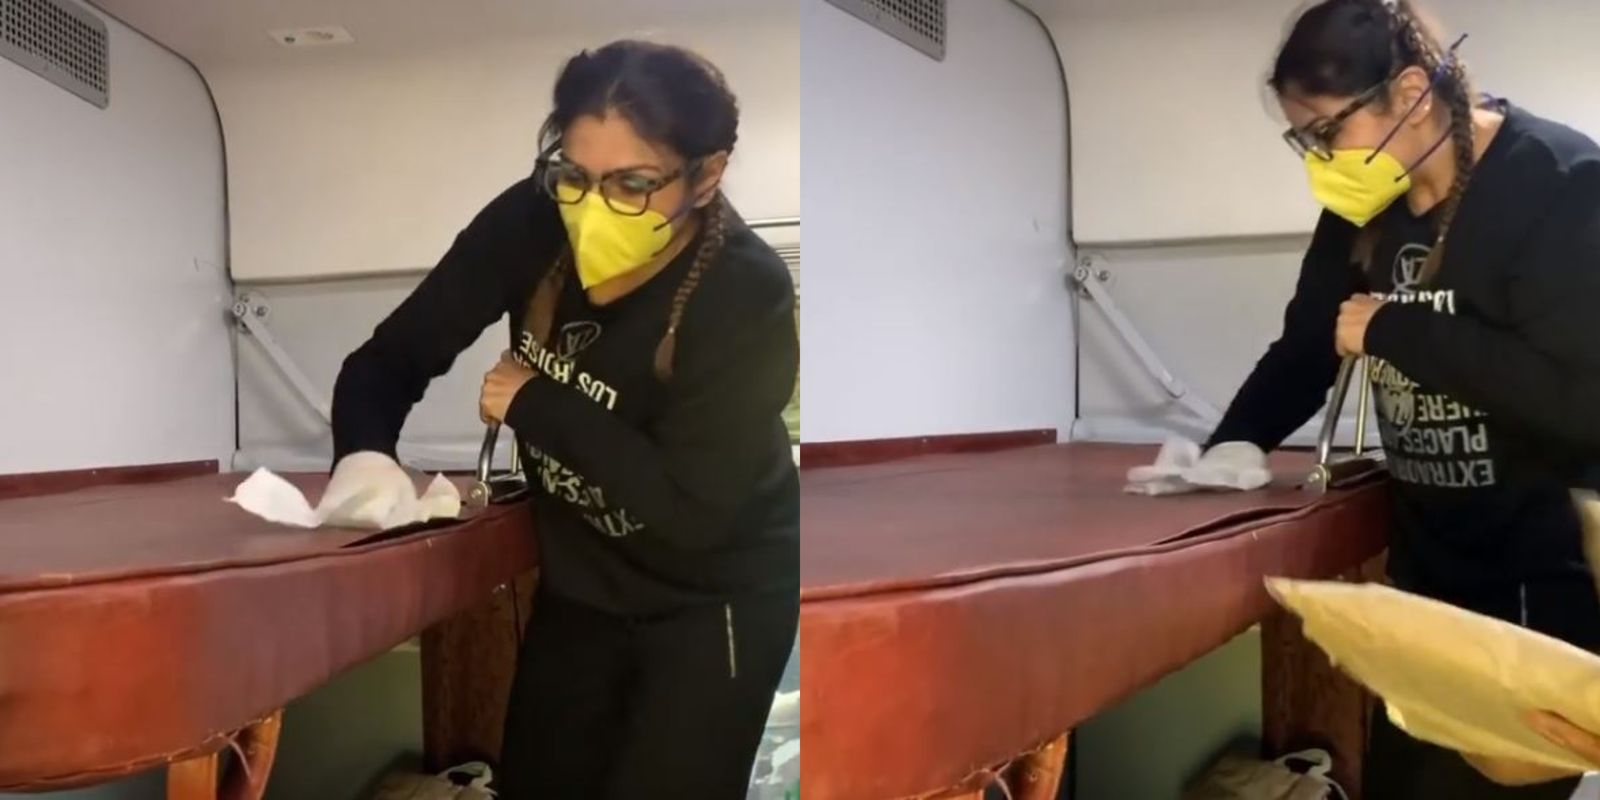 Raveena Tandon Disinfects A Train Berth With Wet Wipe Before Getting 'Comfy' With An Important Message On Travel Safety